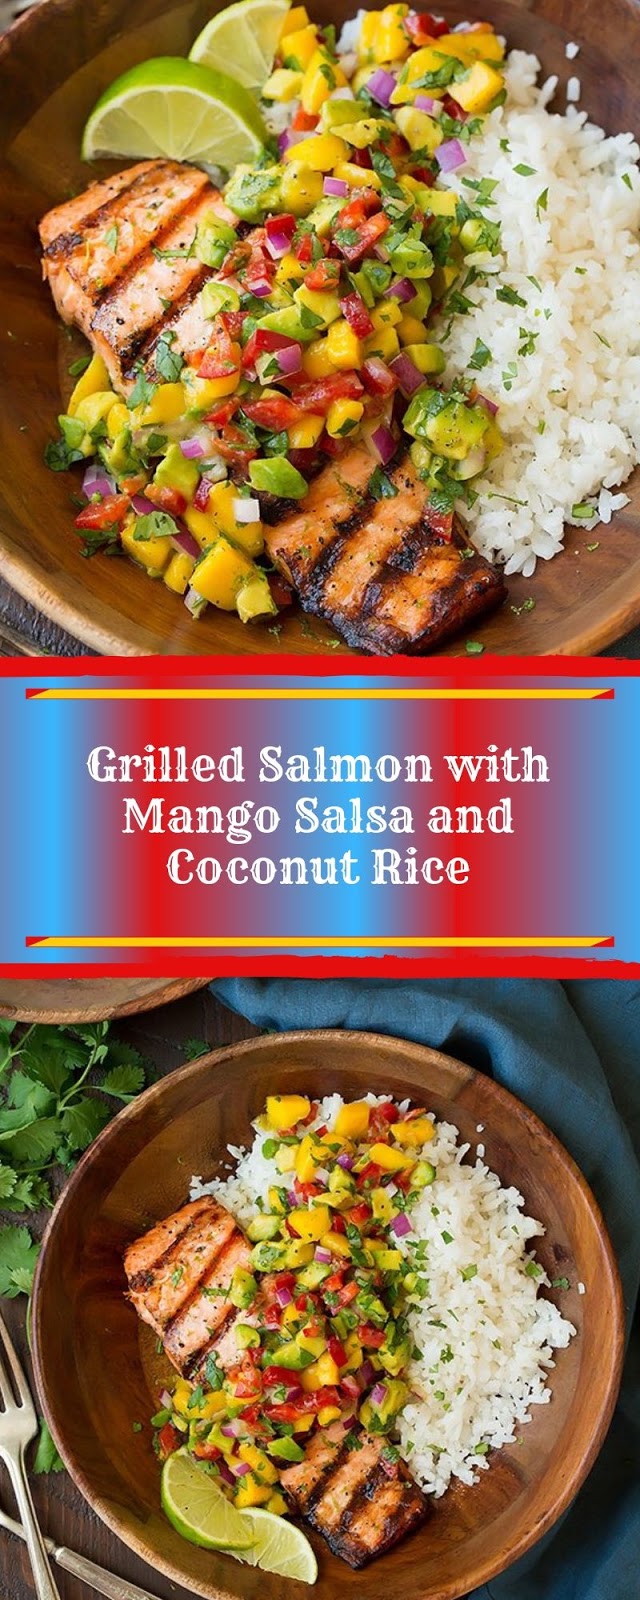 Grilled Salmon with Mango Salsa and Coconut Rice